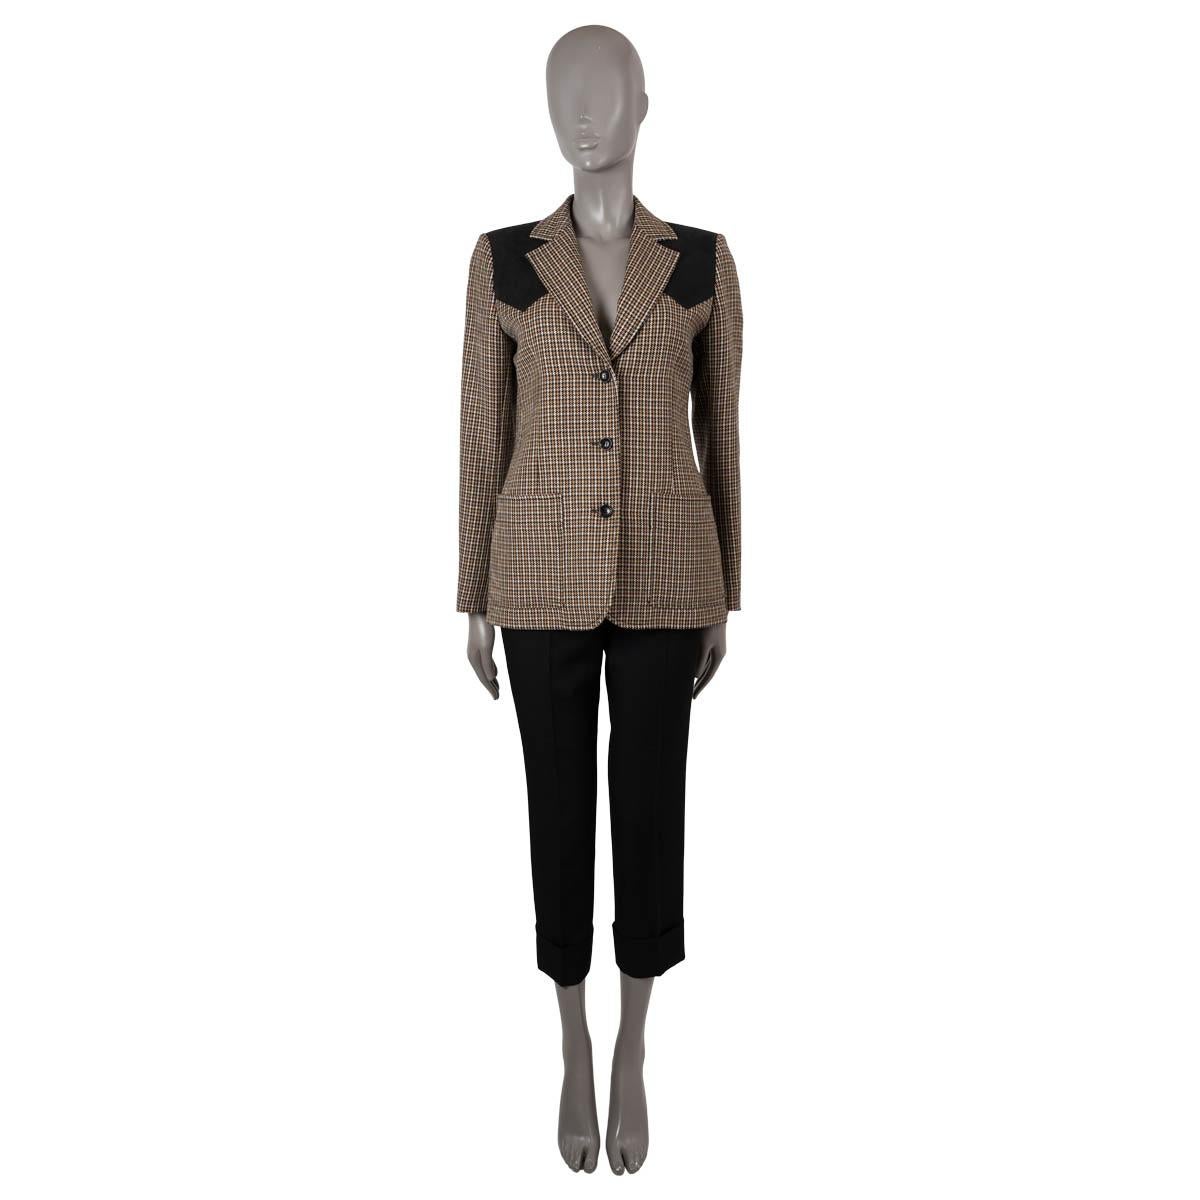 100% authentic Louis Vuitton blazer in beige, cream, black and chocolate brown wool (100%). Features black suede shoulder panels, notched lapels and patch pockets at the waist. Closes with three buttons and is lined in viscose (50%) and cupro (50%).